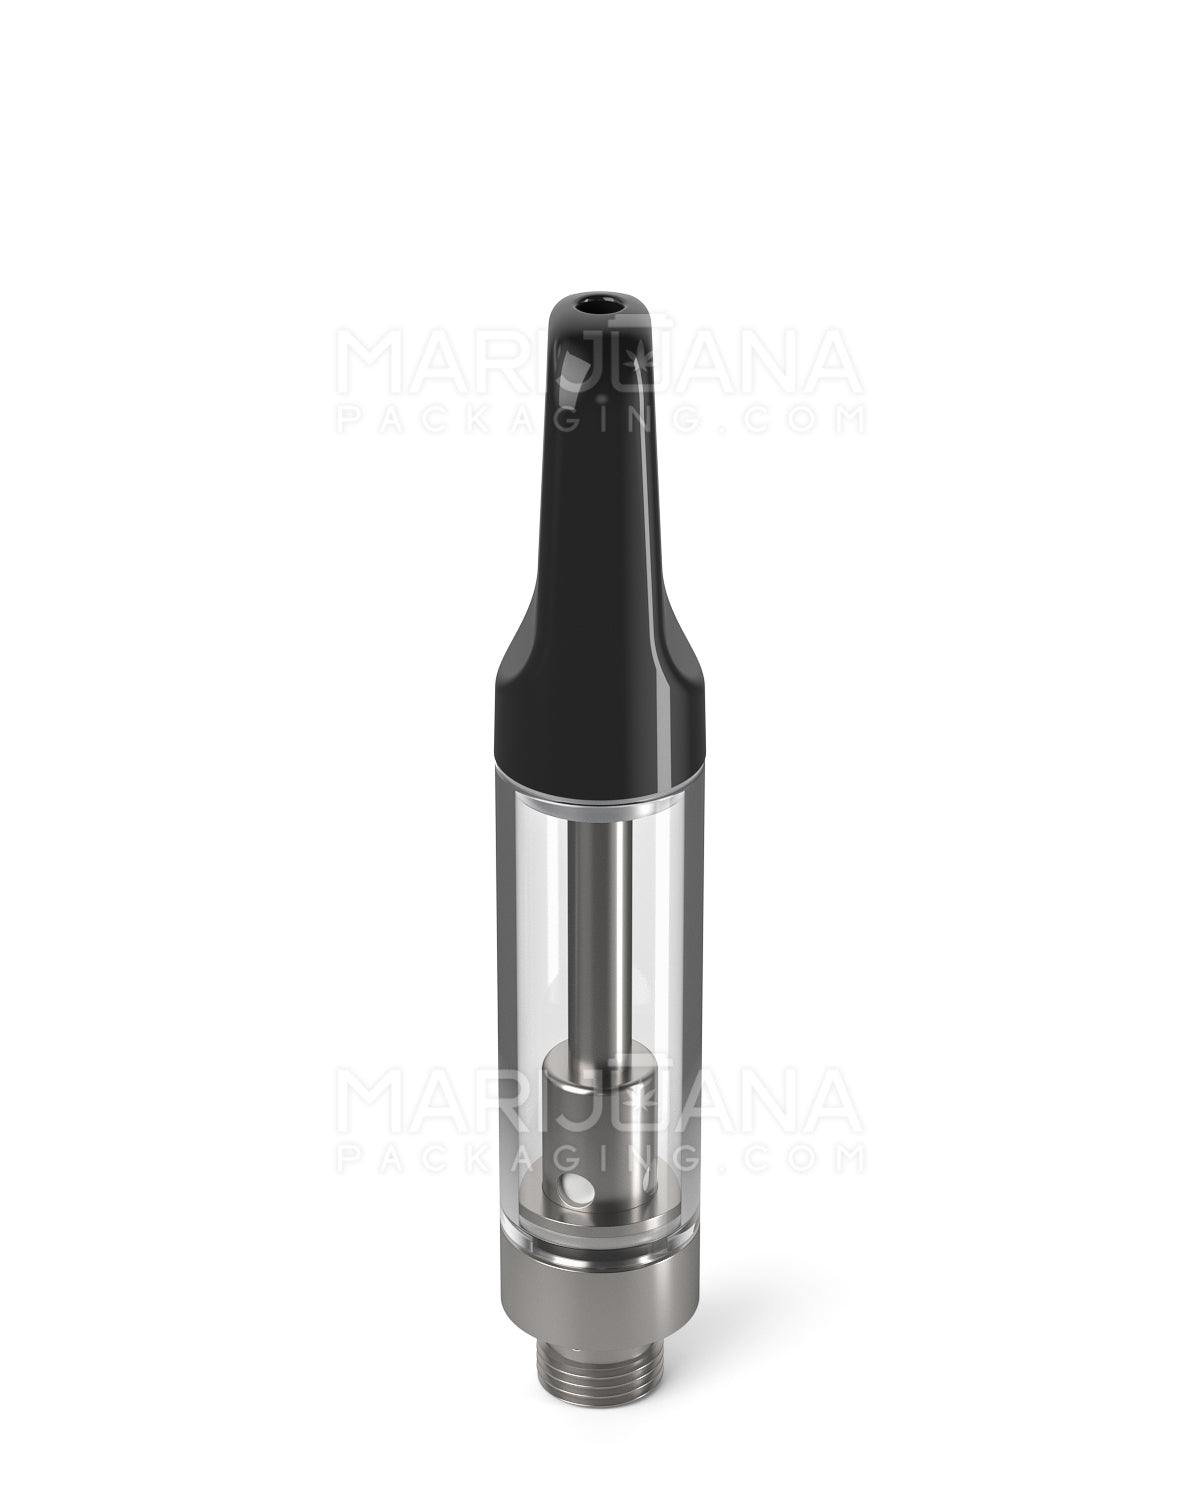 CCELL | Liquid6 Reactor Glass Vape Cartridge with Black Ceramic Mouthpiece | 1mL - Screw On - 100 Count - 4